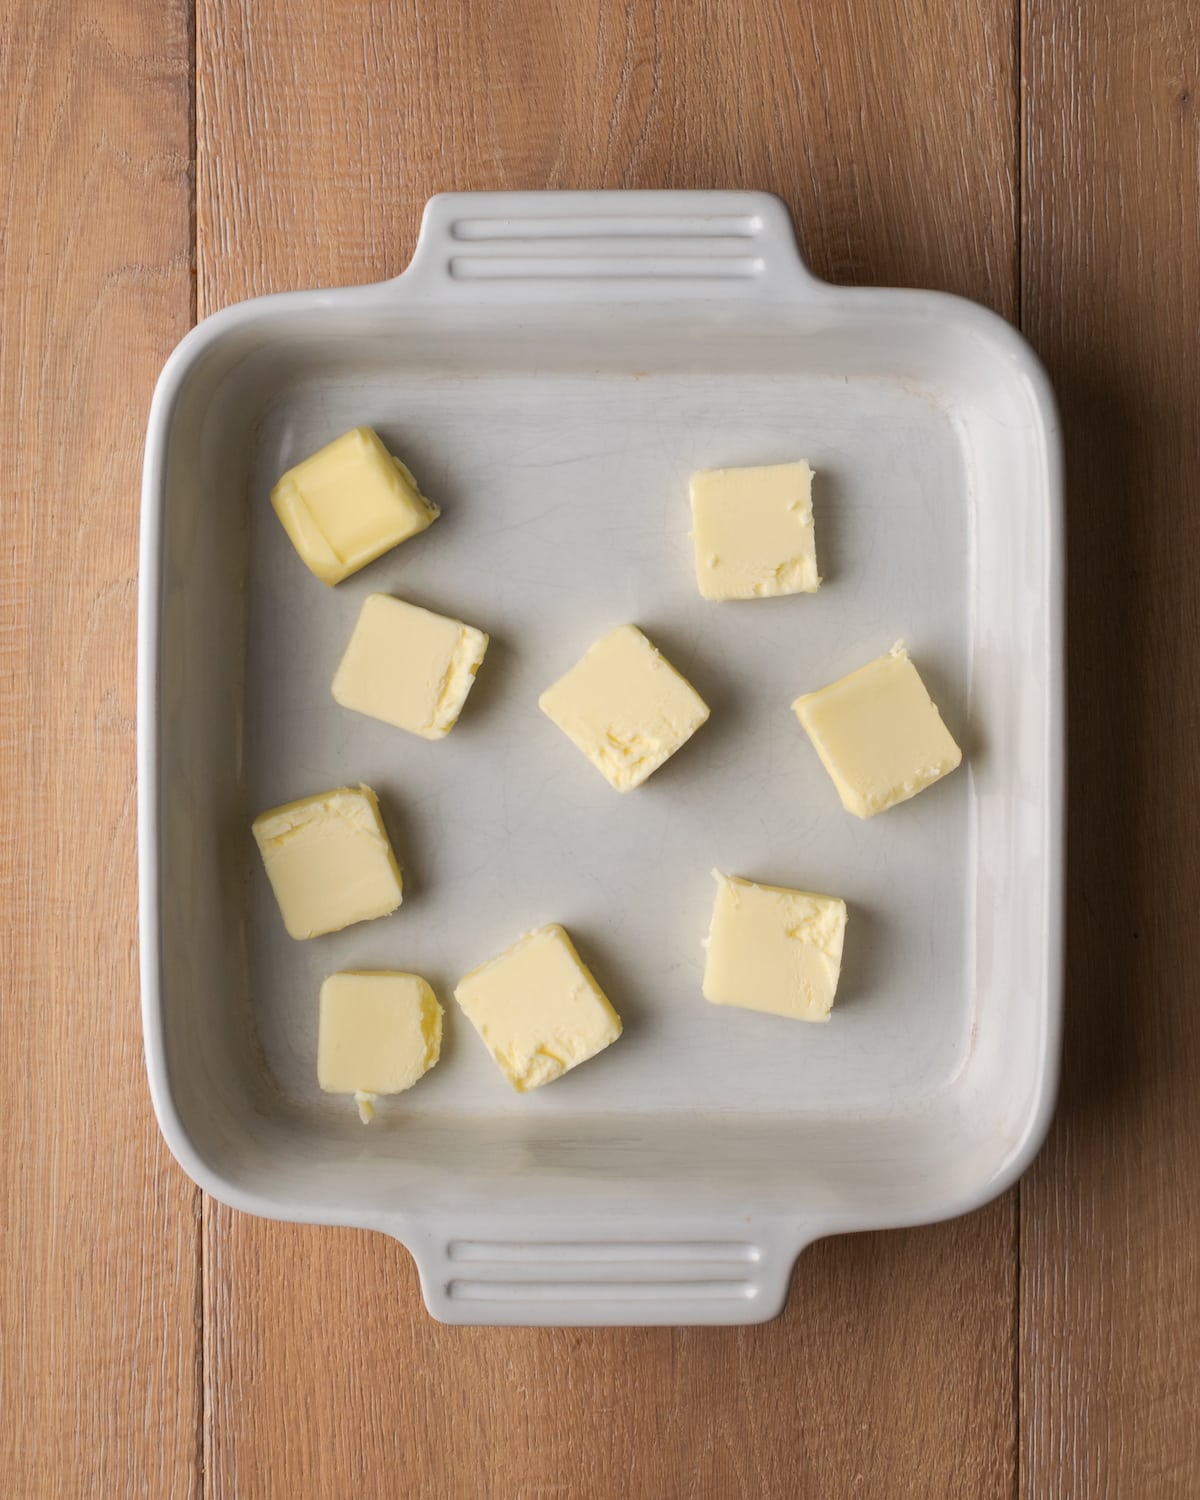 Top view of cubes of butter in a square casserole dish.